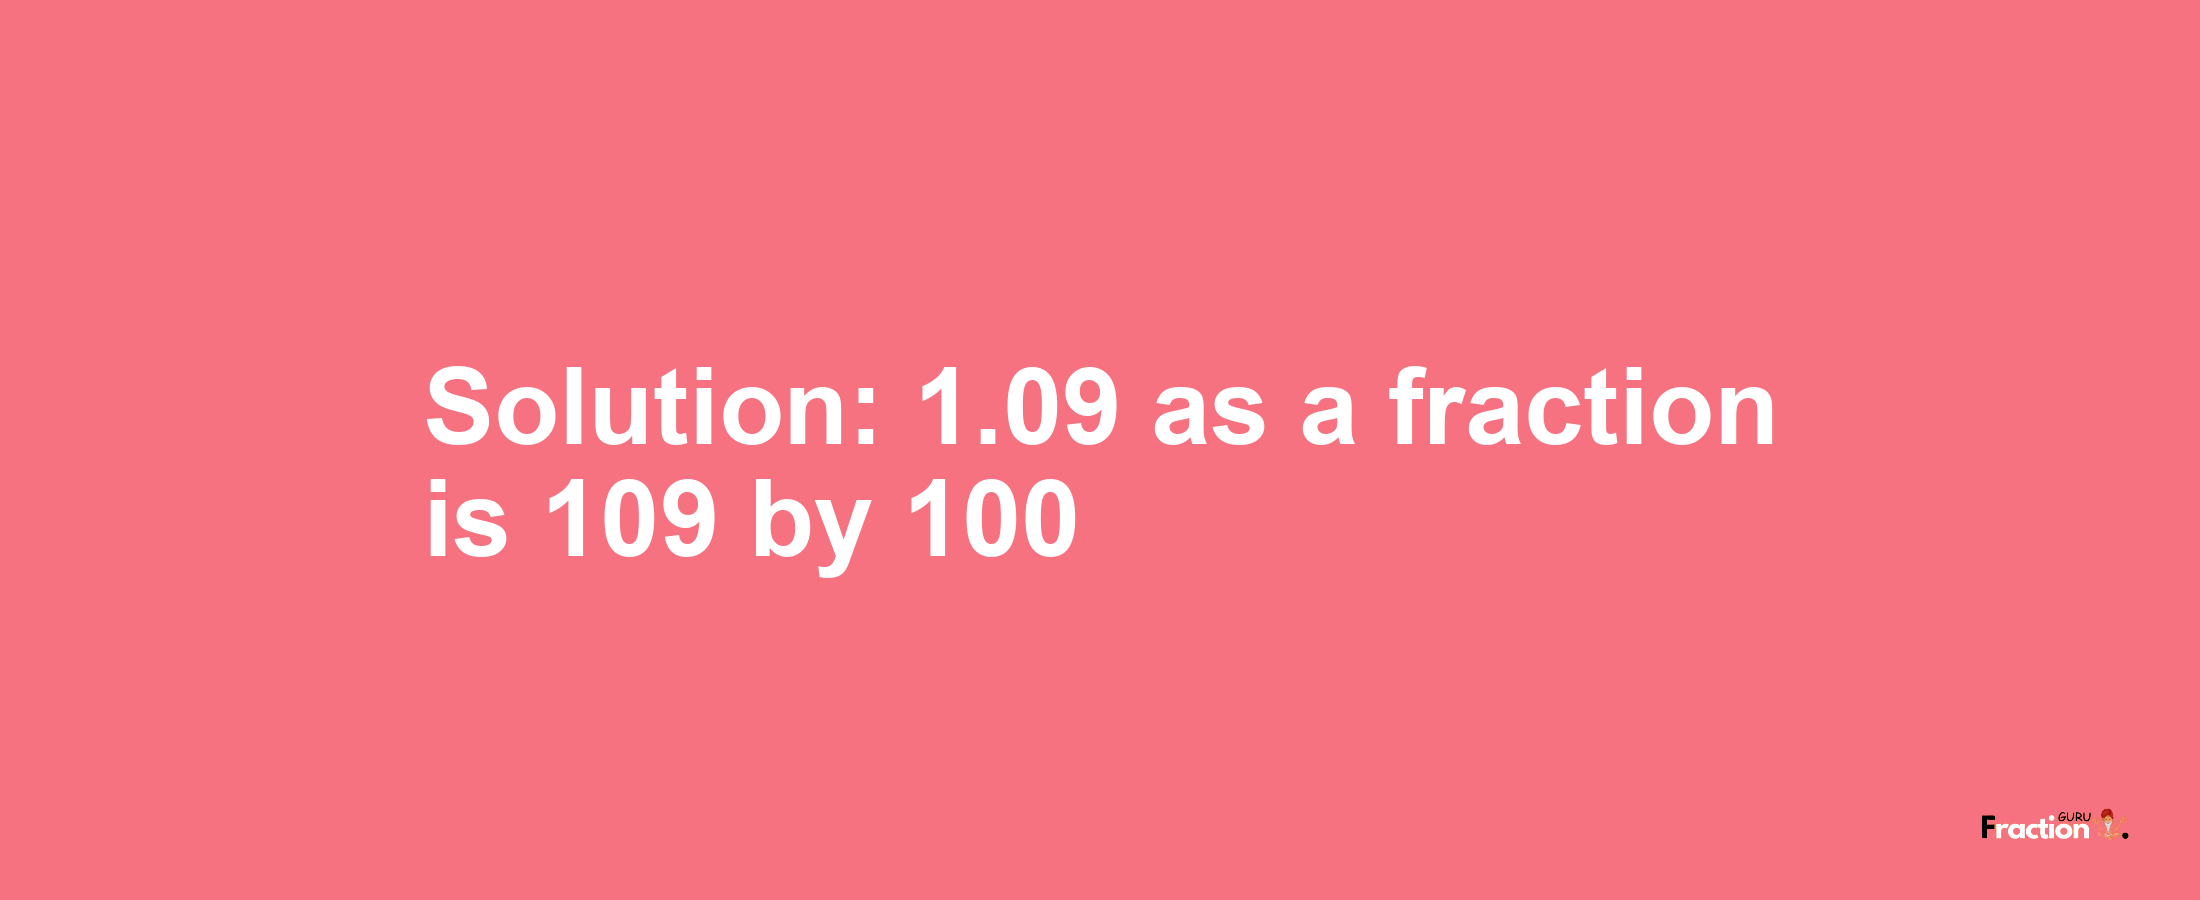 Solution:1.09 as a fraction is 109/100